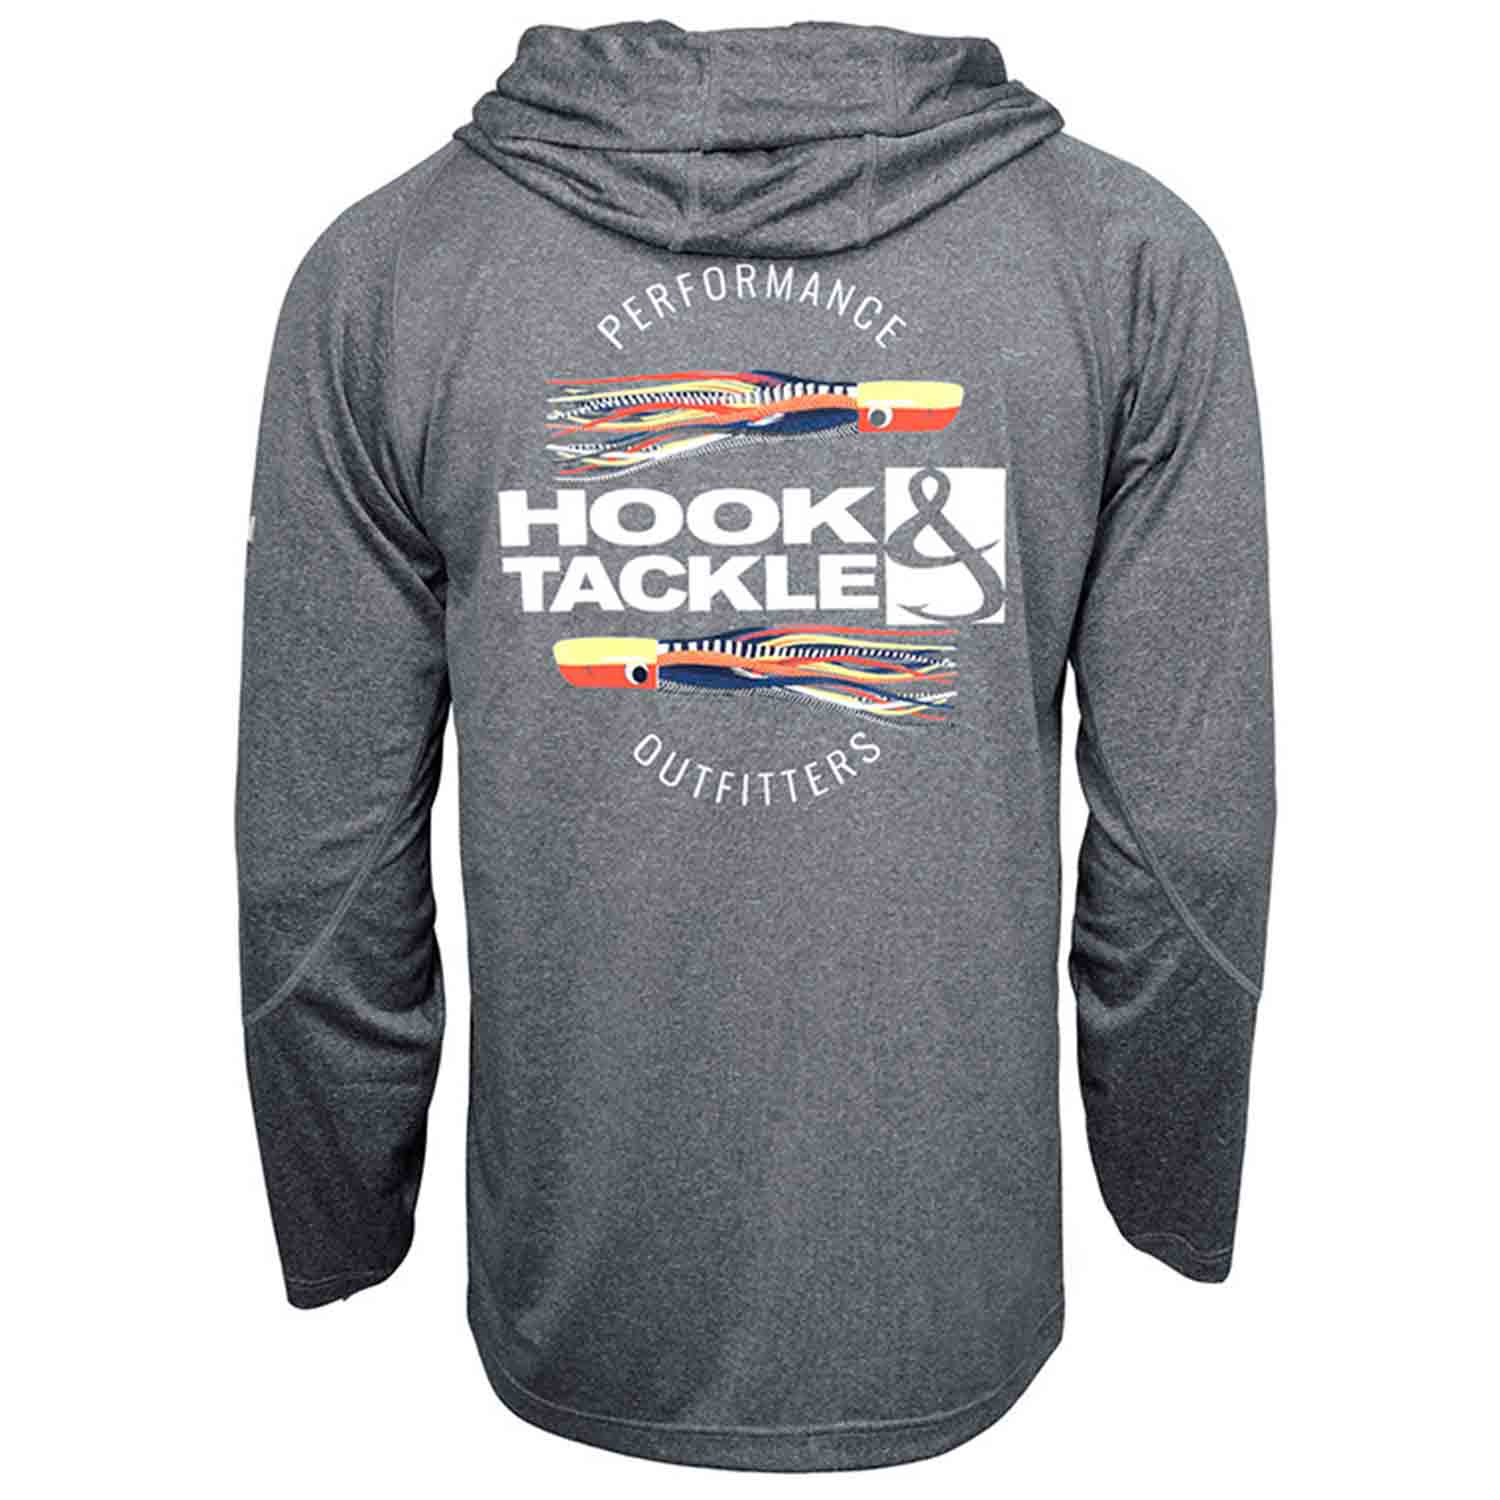 HOOK & TACKLE Men's Offshore Lure Hooded Shirt